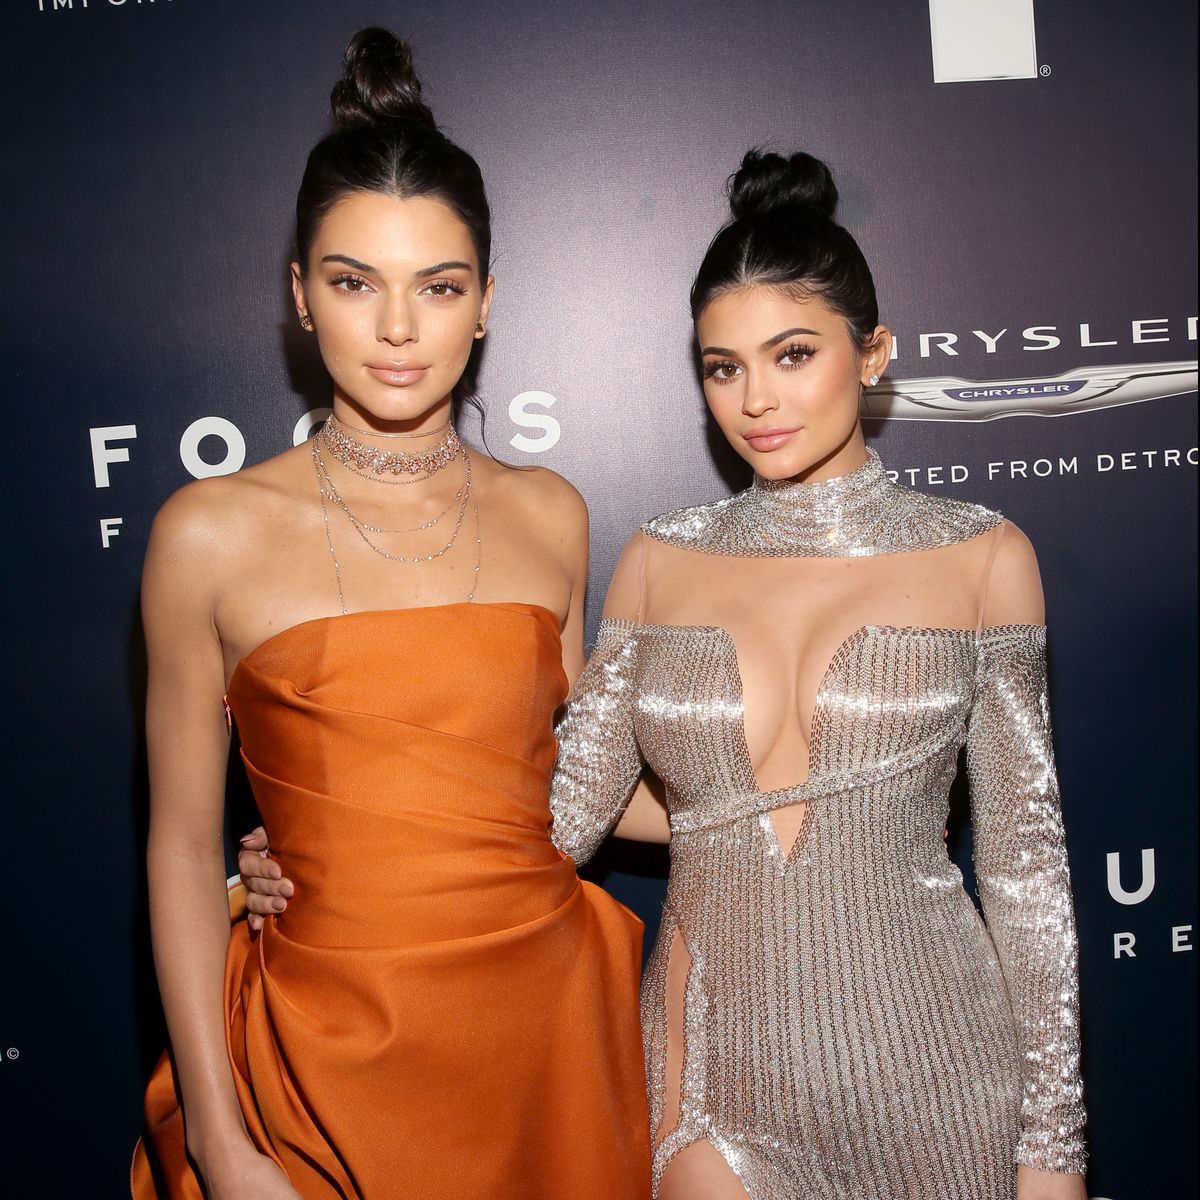 beverly hills, ca   january 08  model kendall jenner and television personality kylie jenner attend the universal, nbc, focus features, e entertainment golden globes after party sponsored by chrysler on january 8, 2017 in beverly hills, california  photo by jesse grantgetty images for nbcuniversal